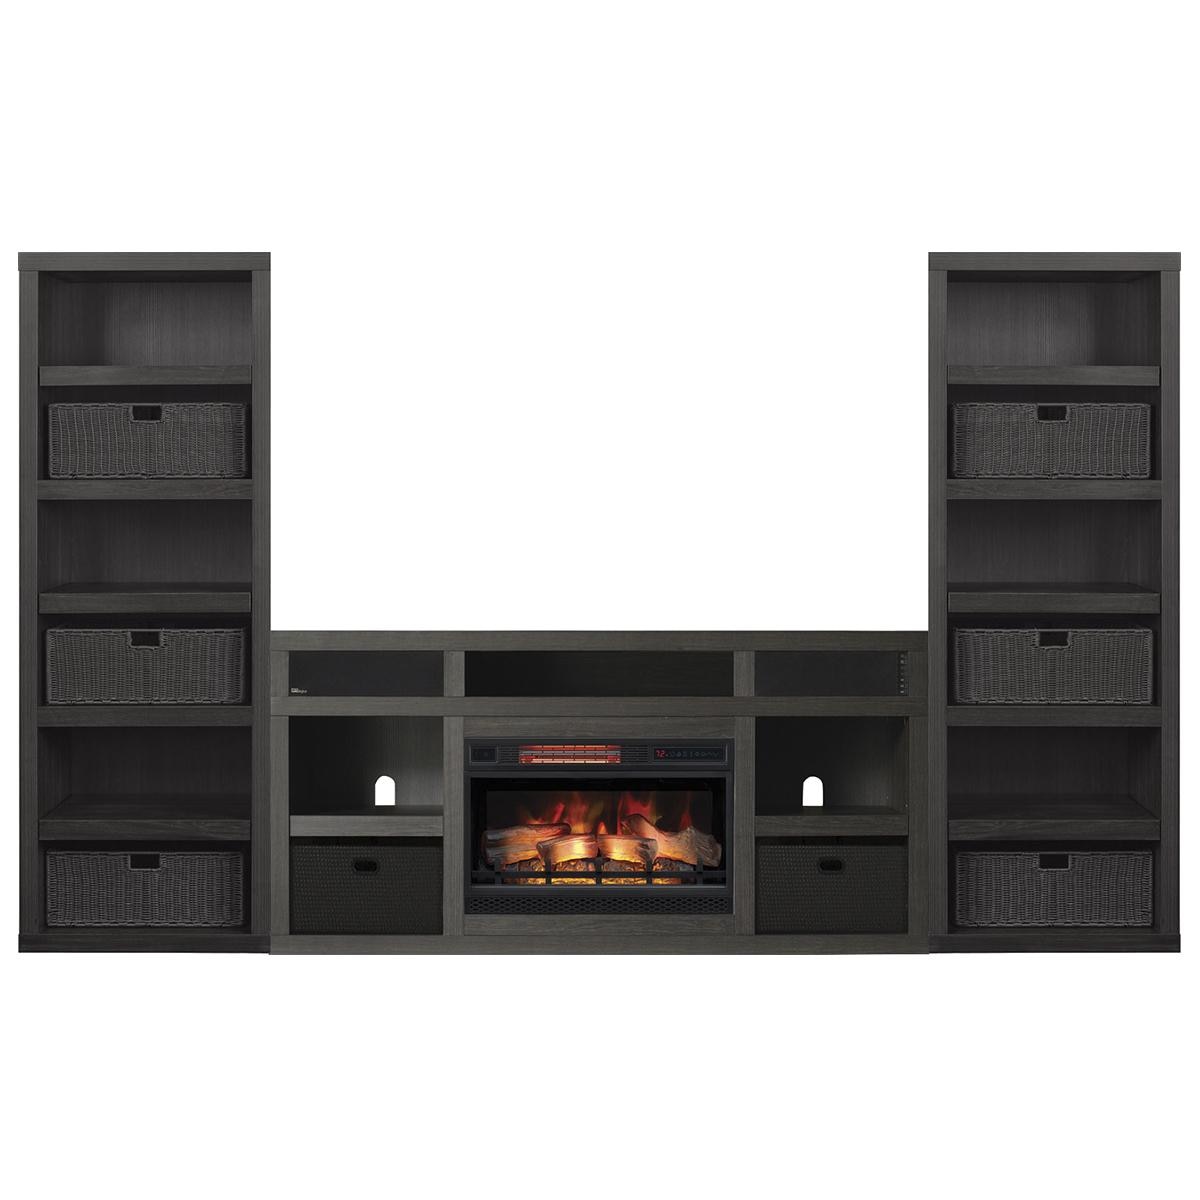 Black and White Fireplace Inspirational Fabio Flames Greatlin 3 Piece Fireplace Entertainment Wall